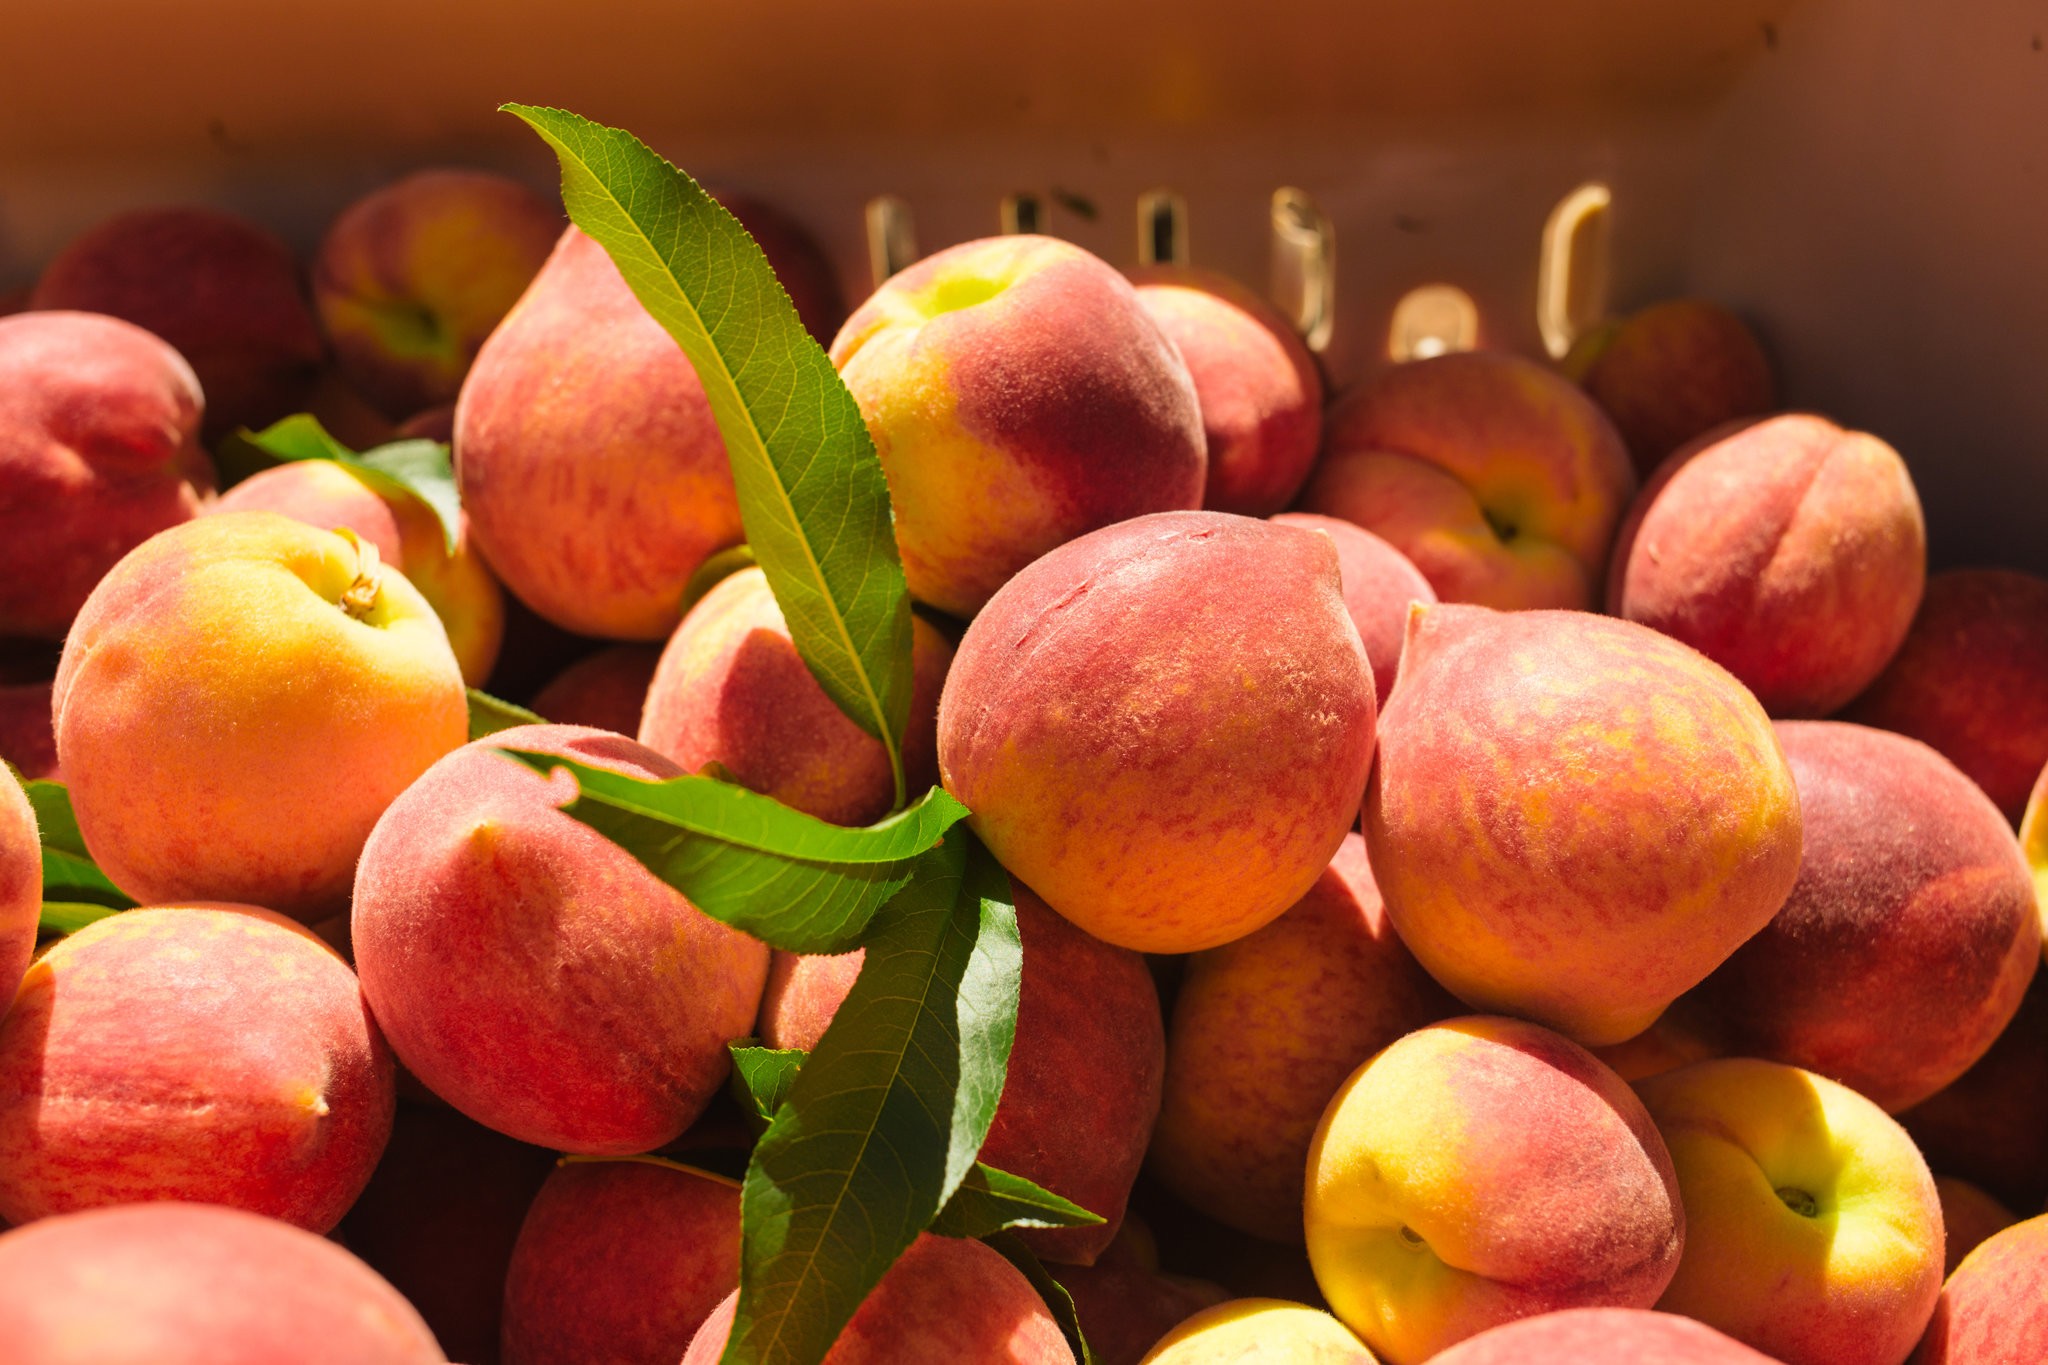 Peaches are a particularly delicate fruit to grow, requiring the right amount of cold weather at just the right time to produce good fruit. CreditMaura Friedman for The New York Times